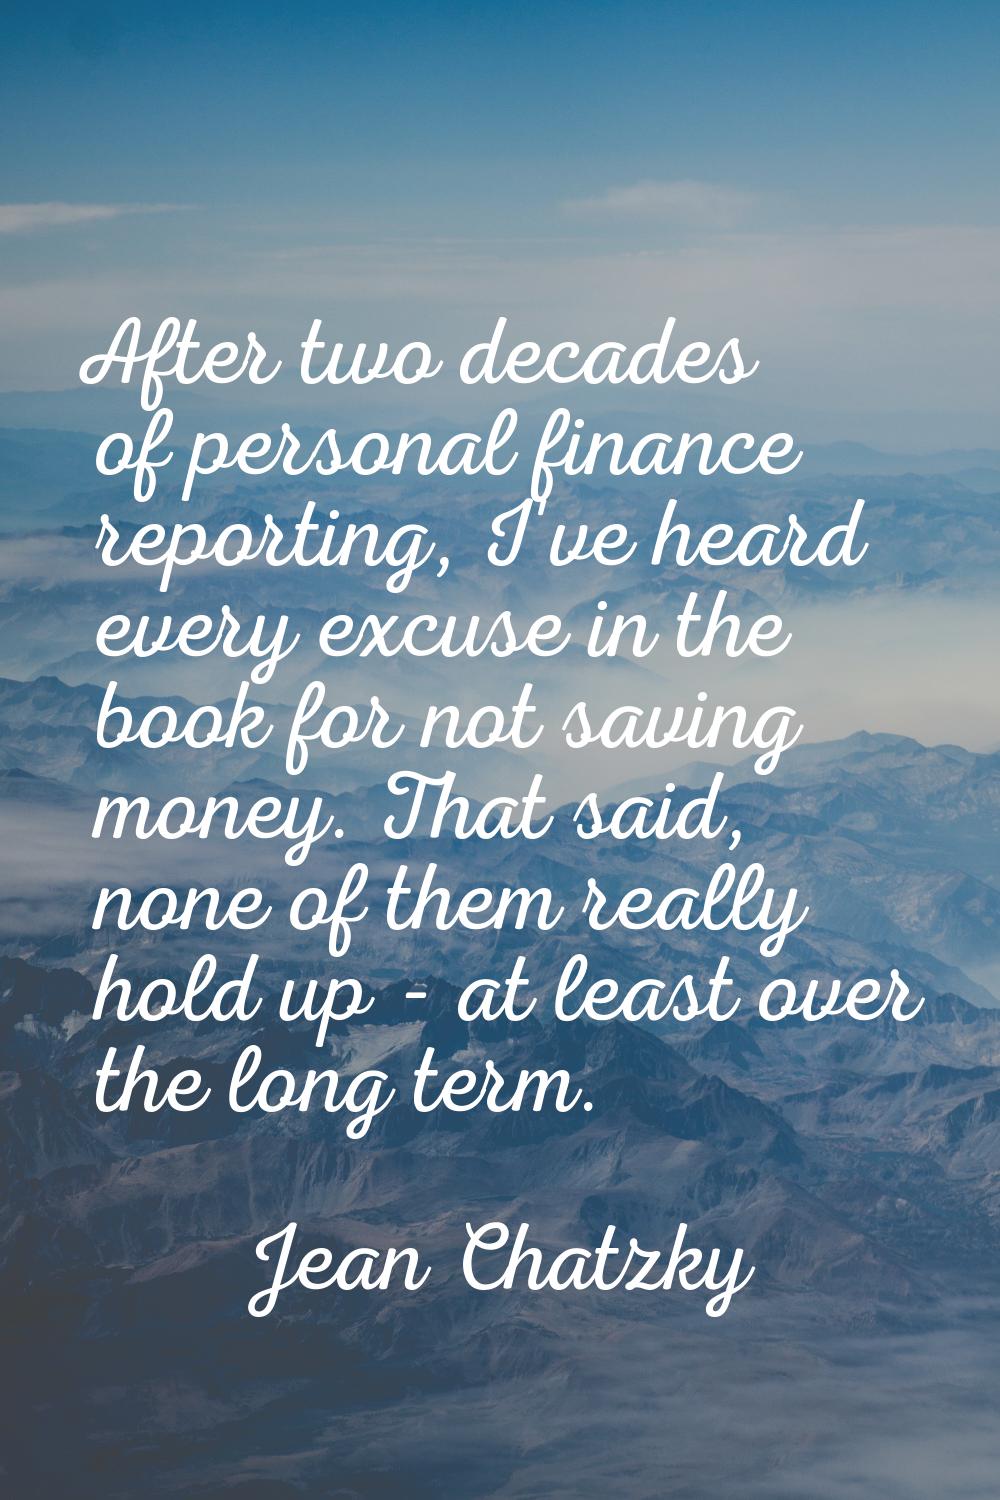 After two decades of personal finance reporting, I've heard every excuse in the book for not saving